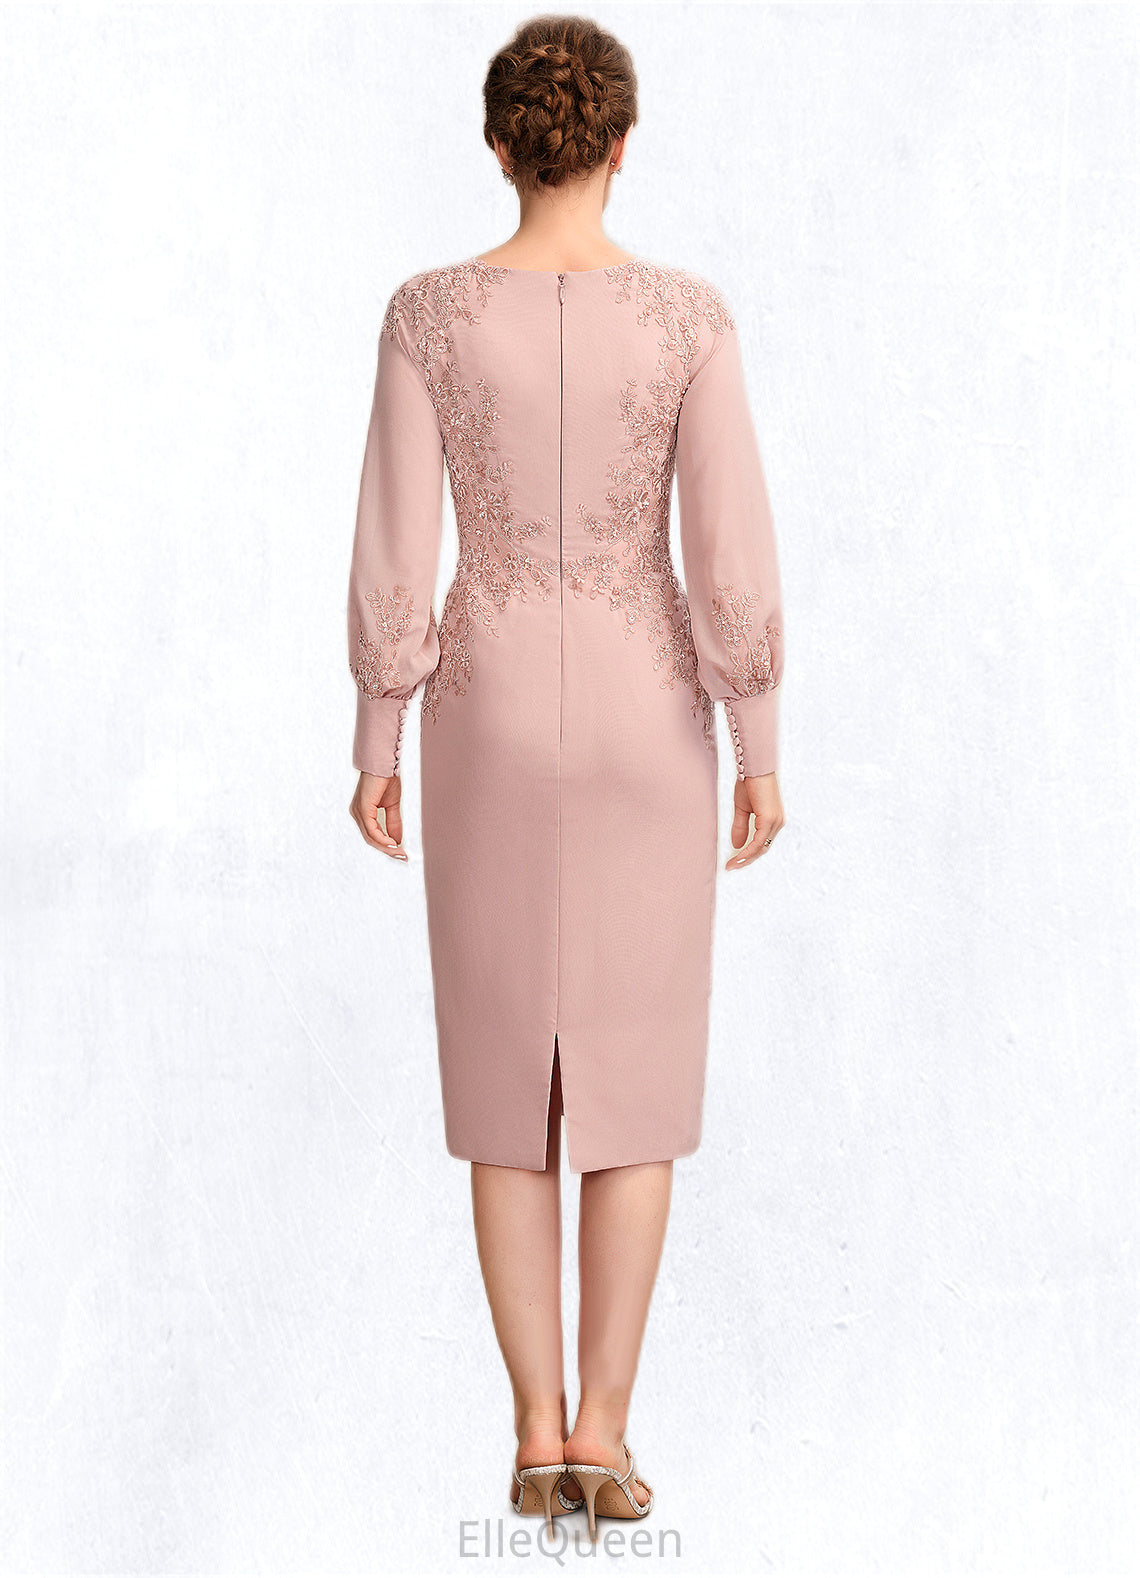 Kaylen Sheath/Column Scoop Neck Knee-Length Chiffon Lace Mother of the Bride Dress With Beading Sequins DG126P0015020